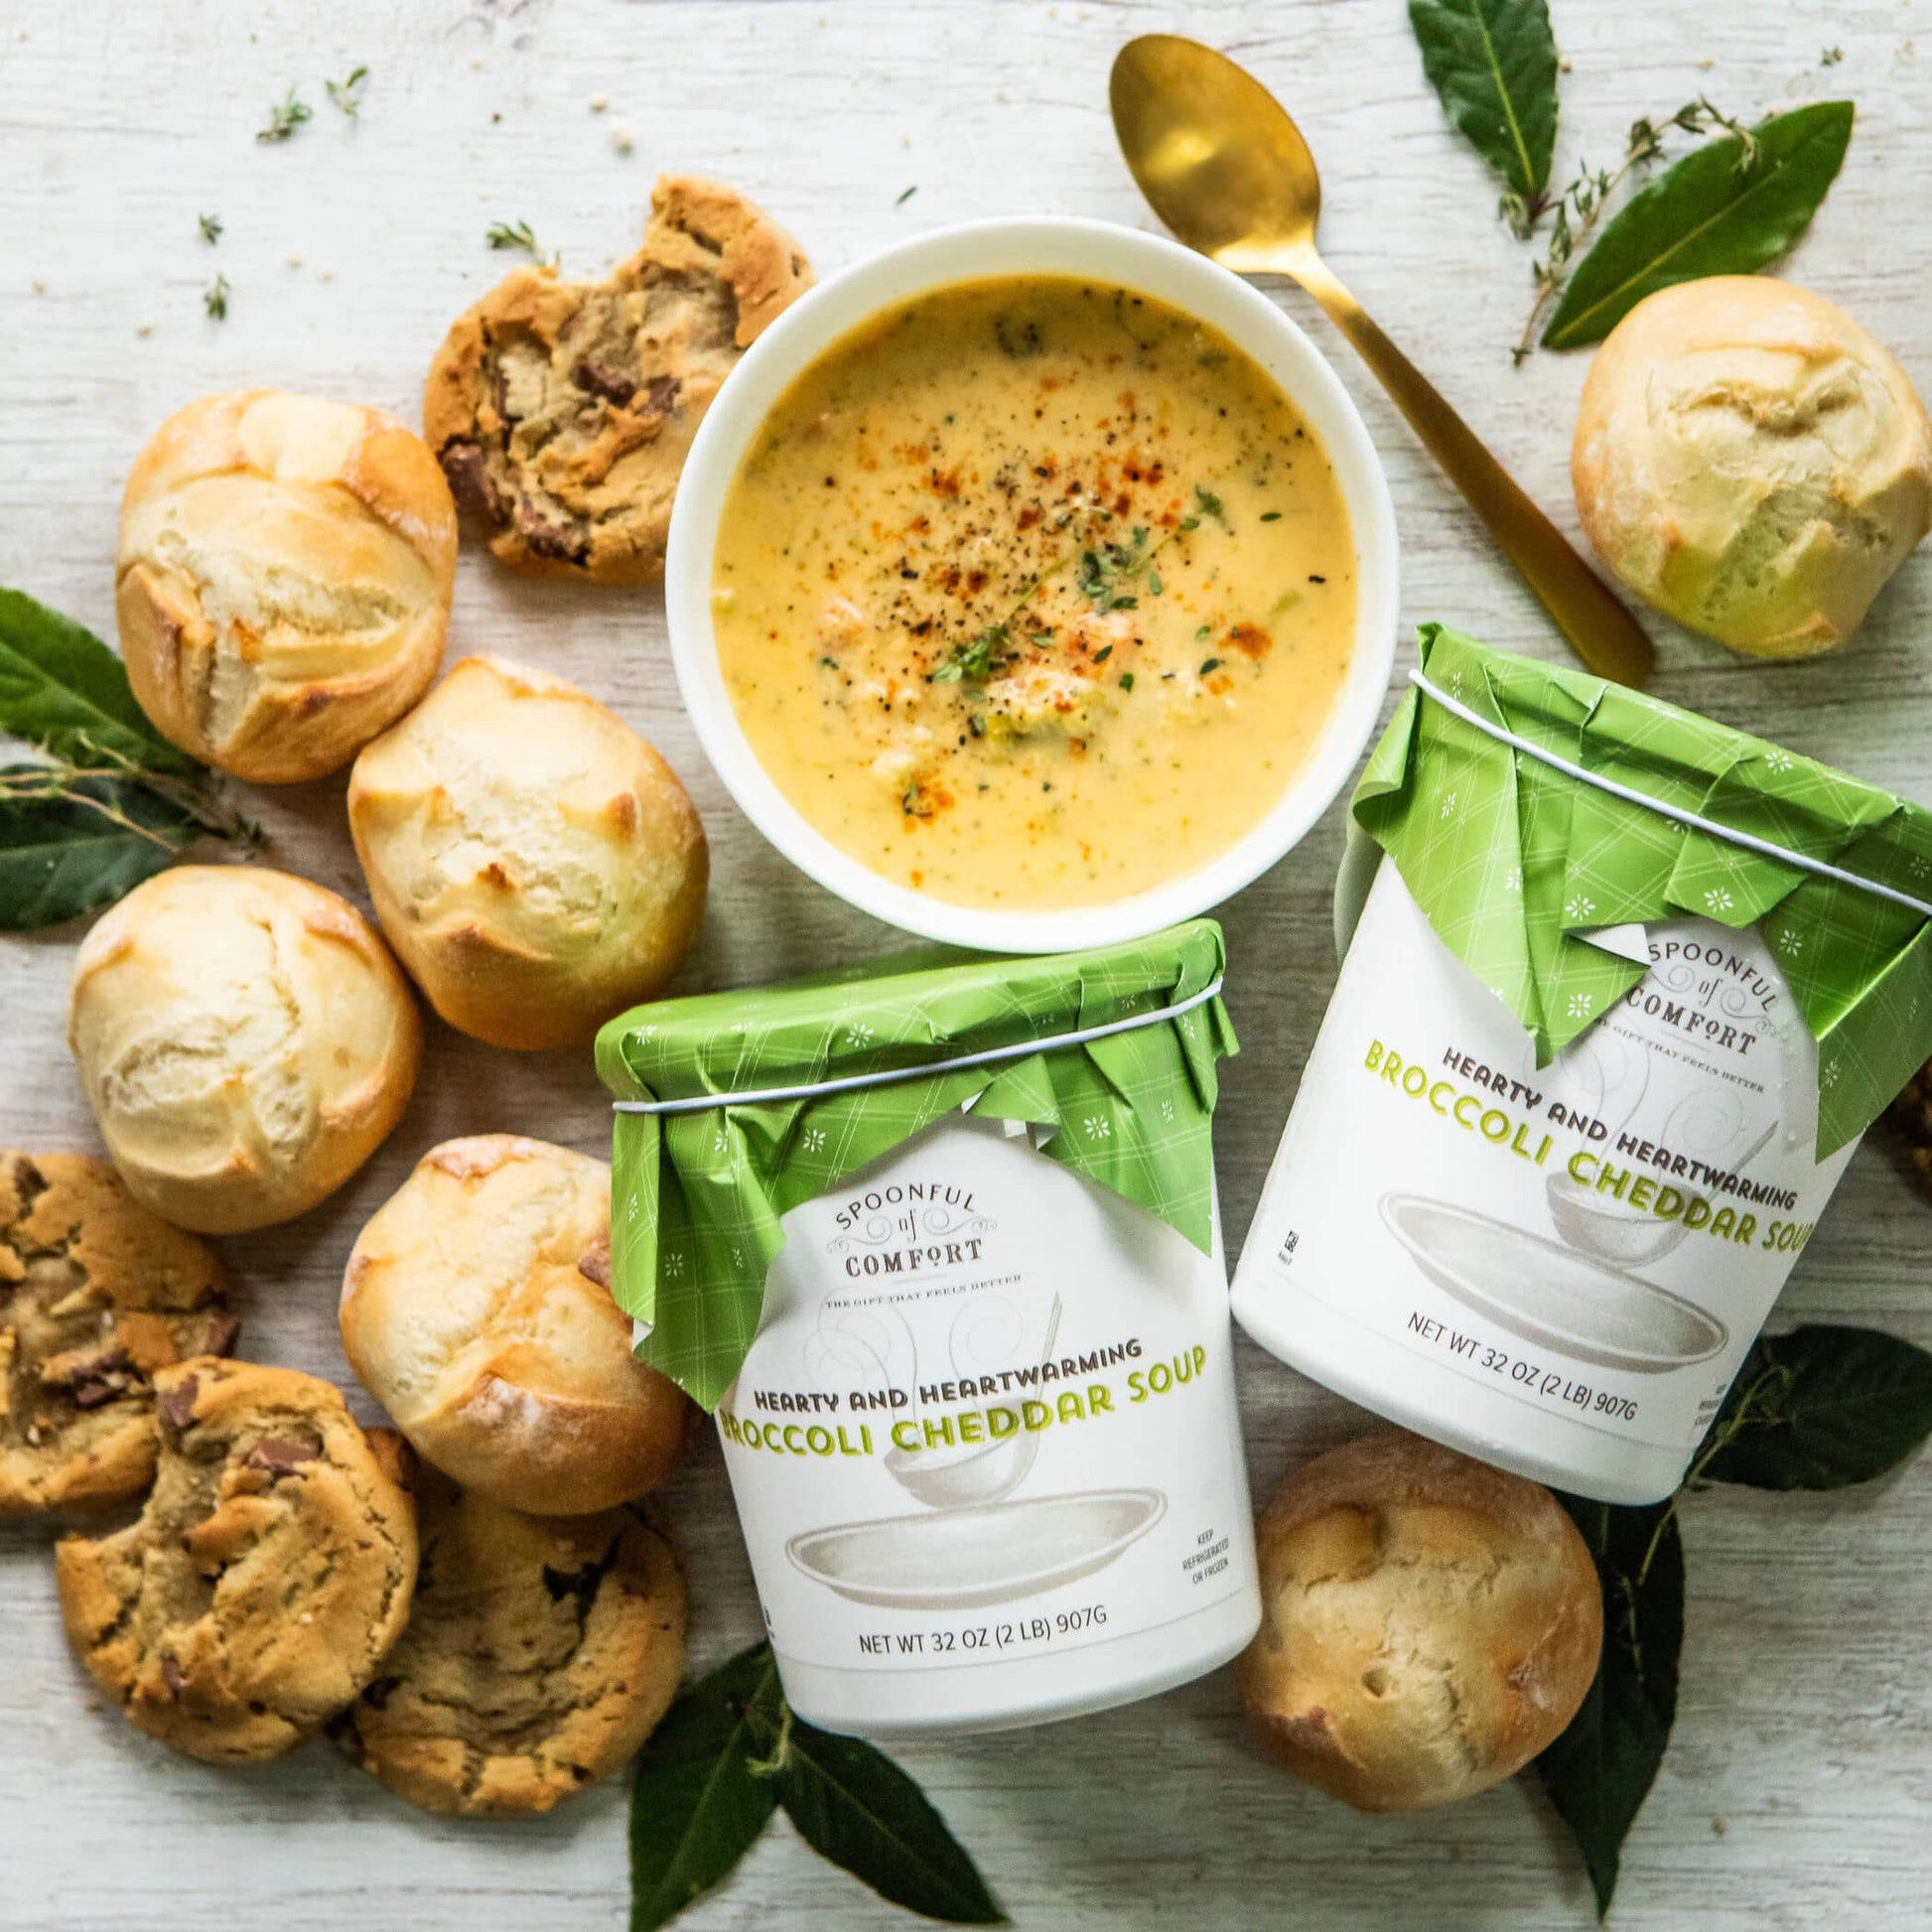 broccoli cheddar soup package product image